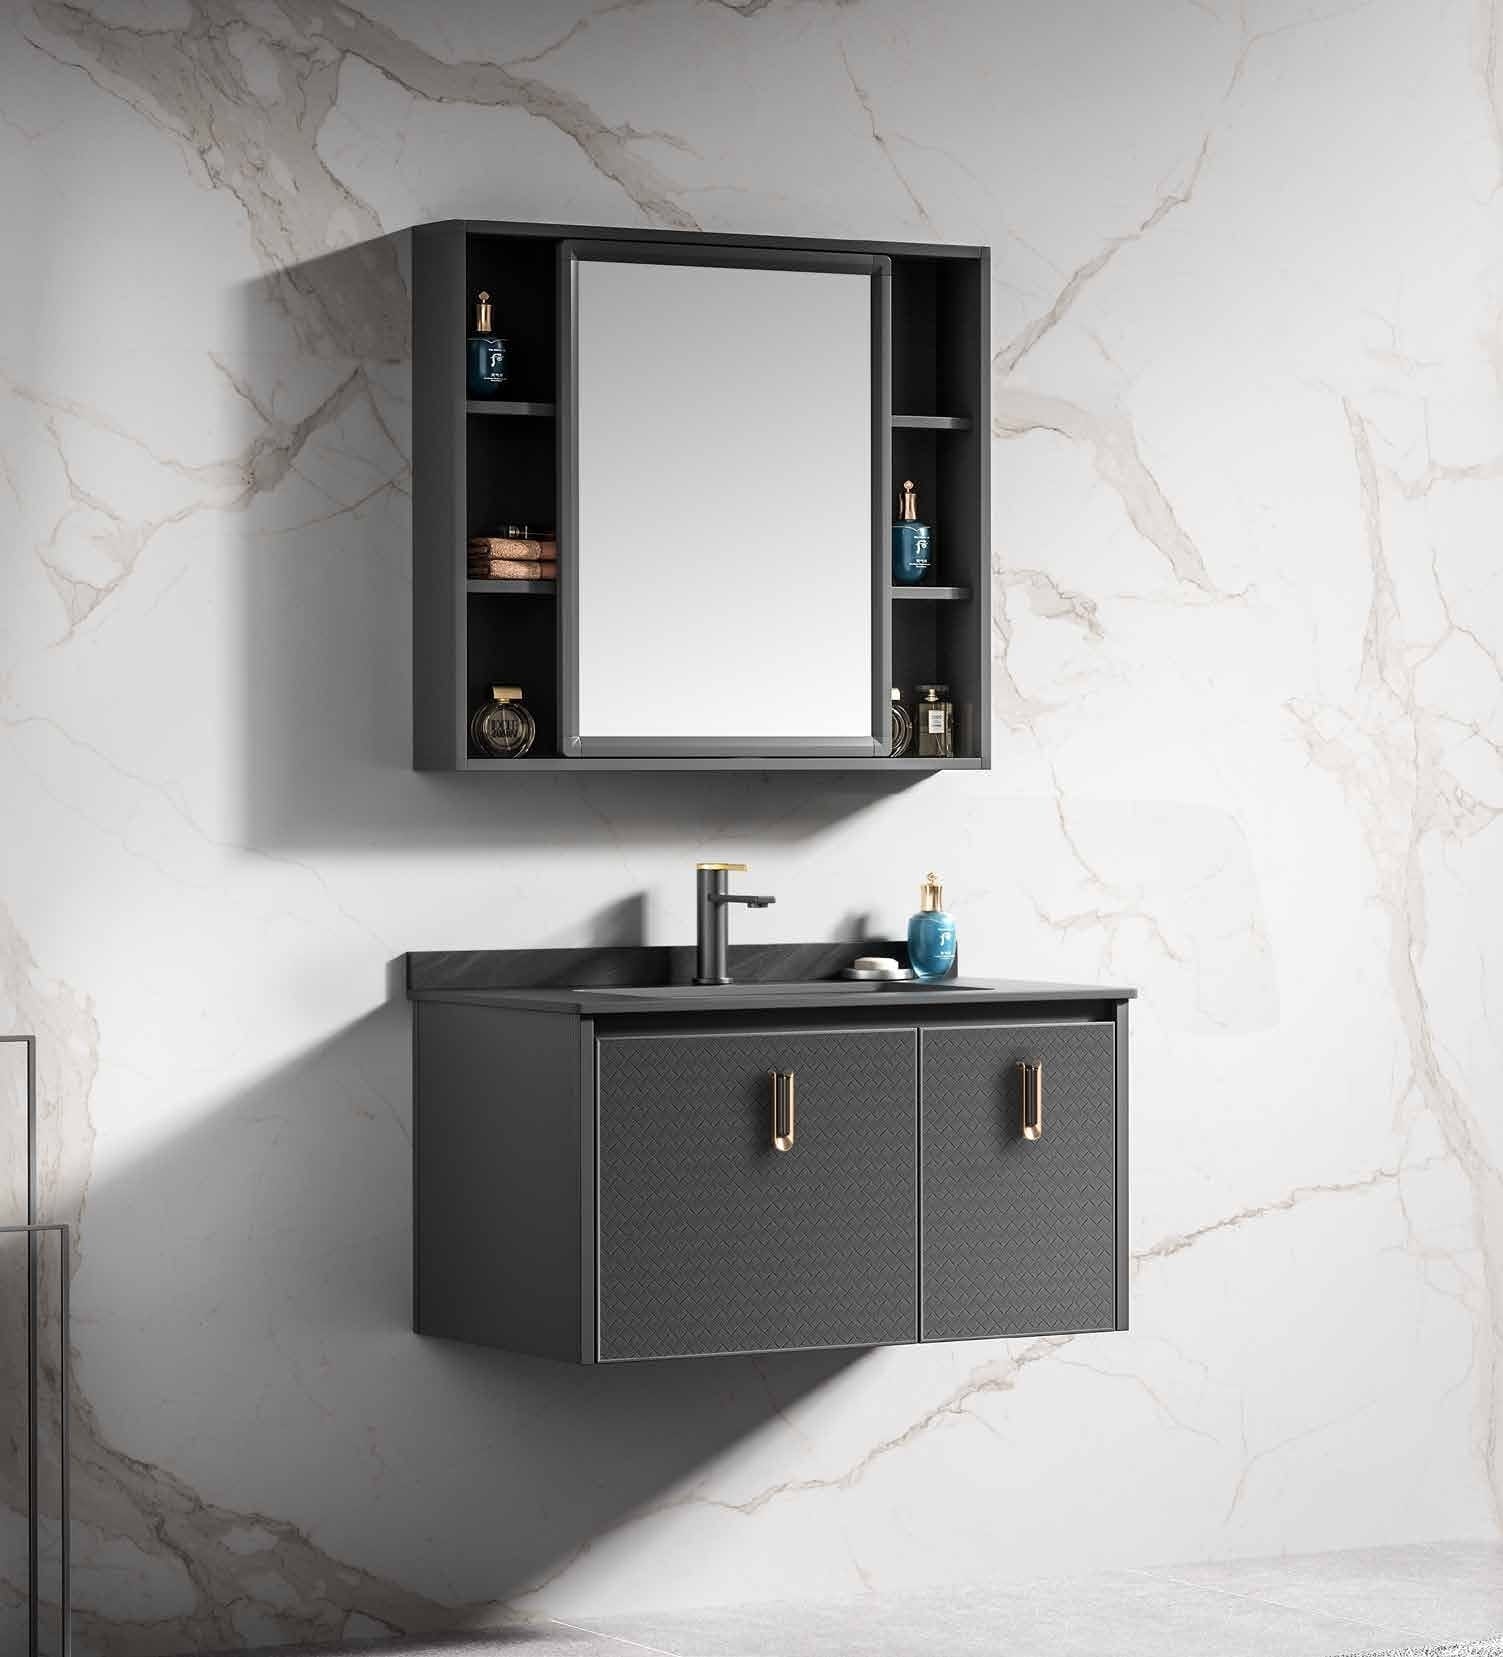 Buy Bathroom Luxury 60cm Wall-Mounted Vanity Cabinet with Mirror - WK-K-9322 | Shop at Supply Master Accra, Ghana Bathroom Vanity & Cabinets Buy Tools hardware Building materials